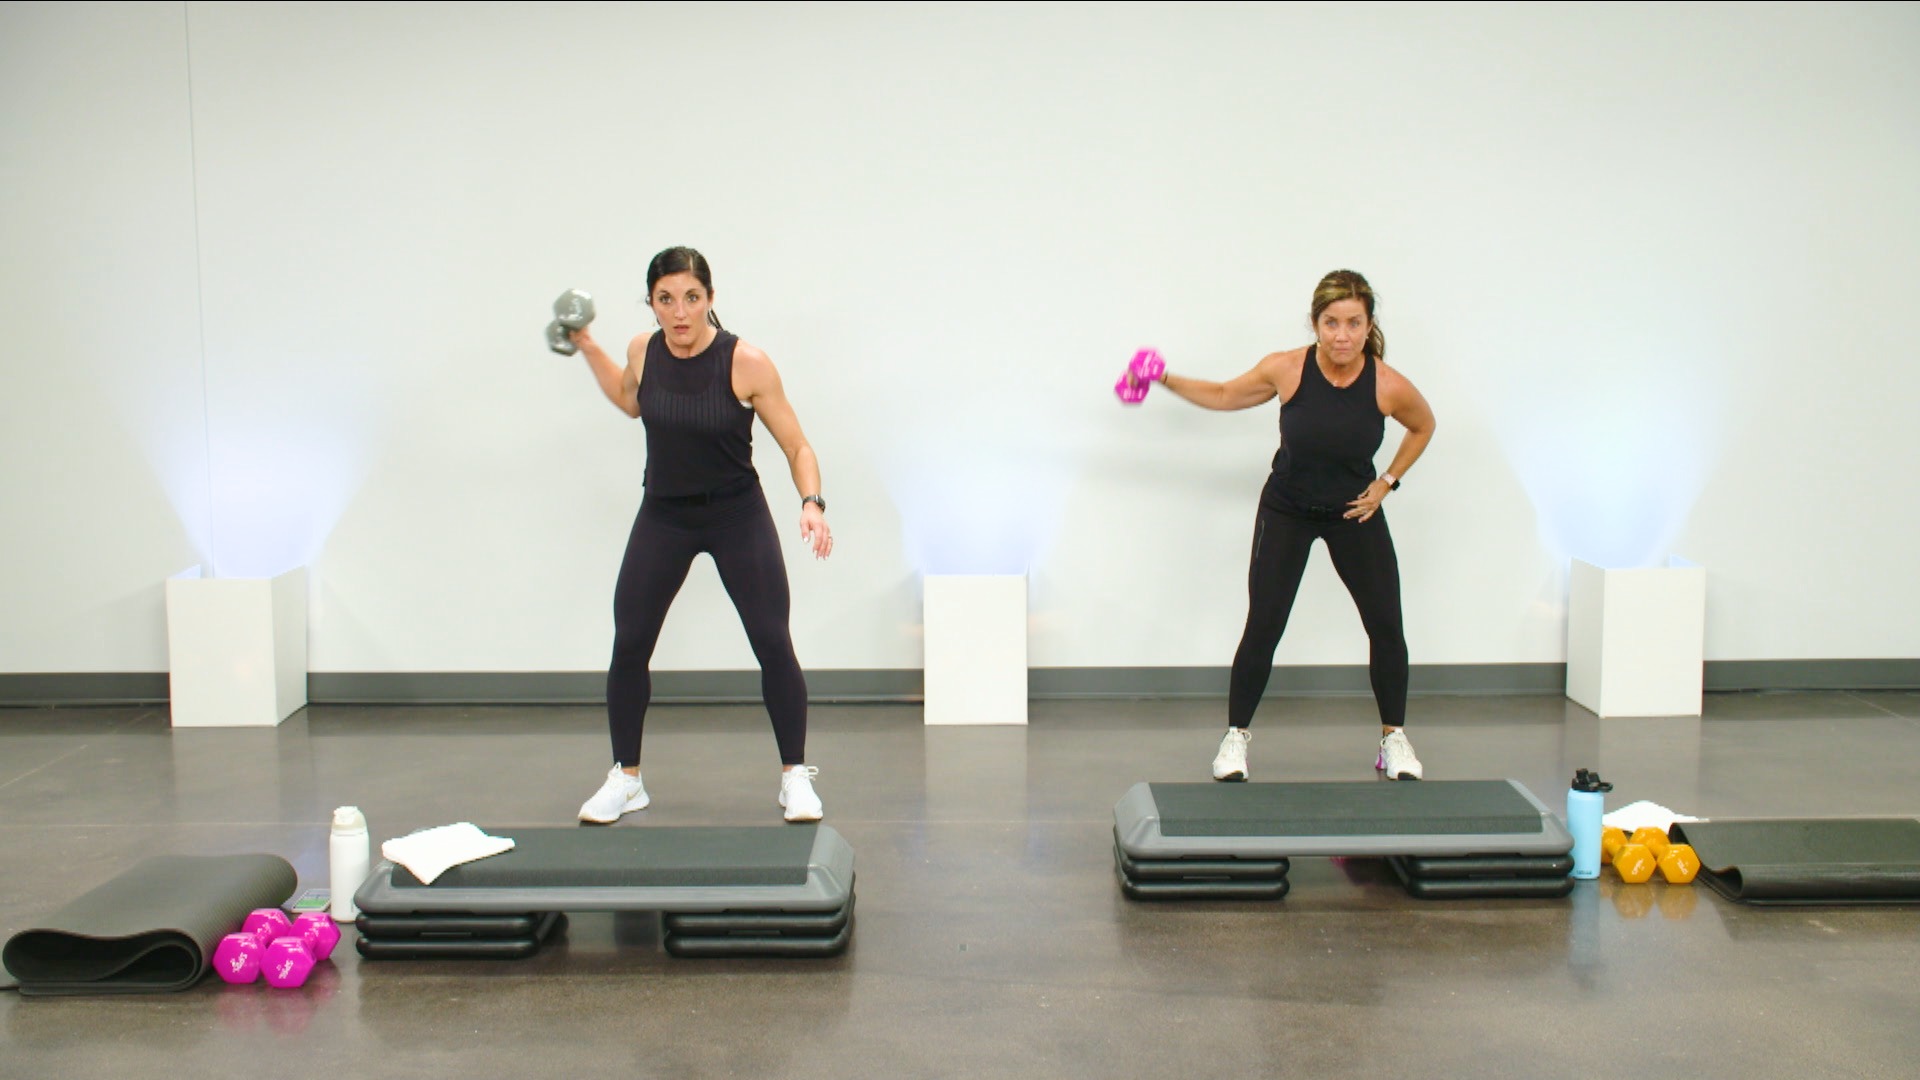 Two women working out with a dumbbell in one hand and a step